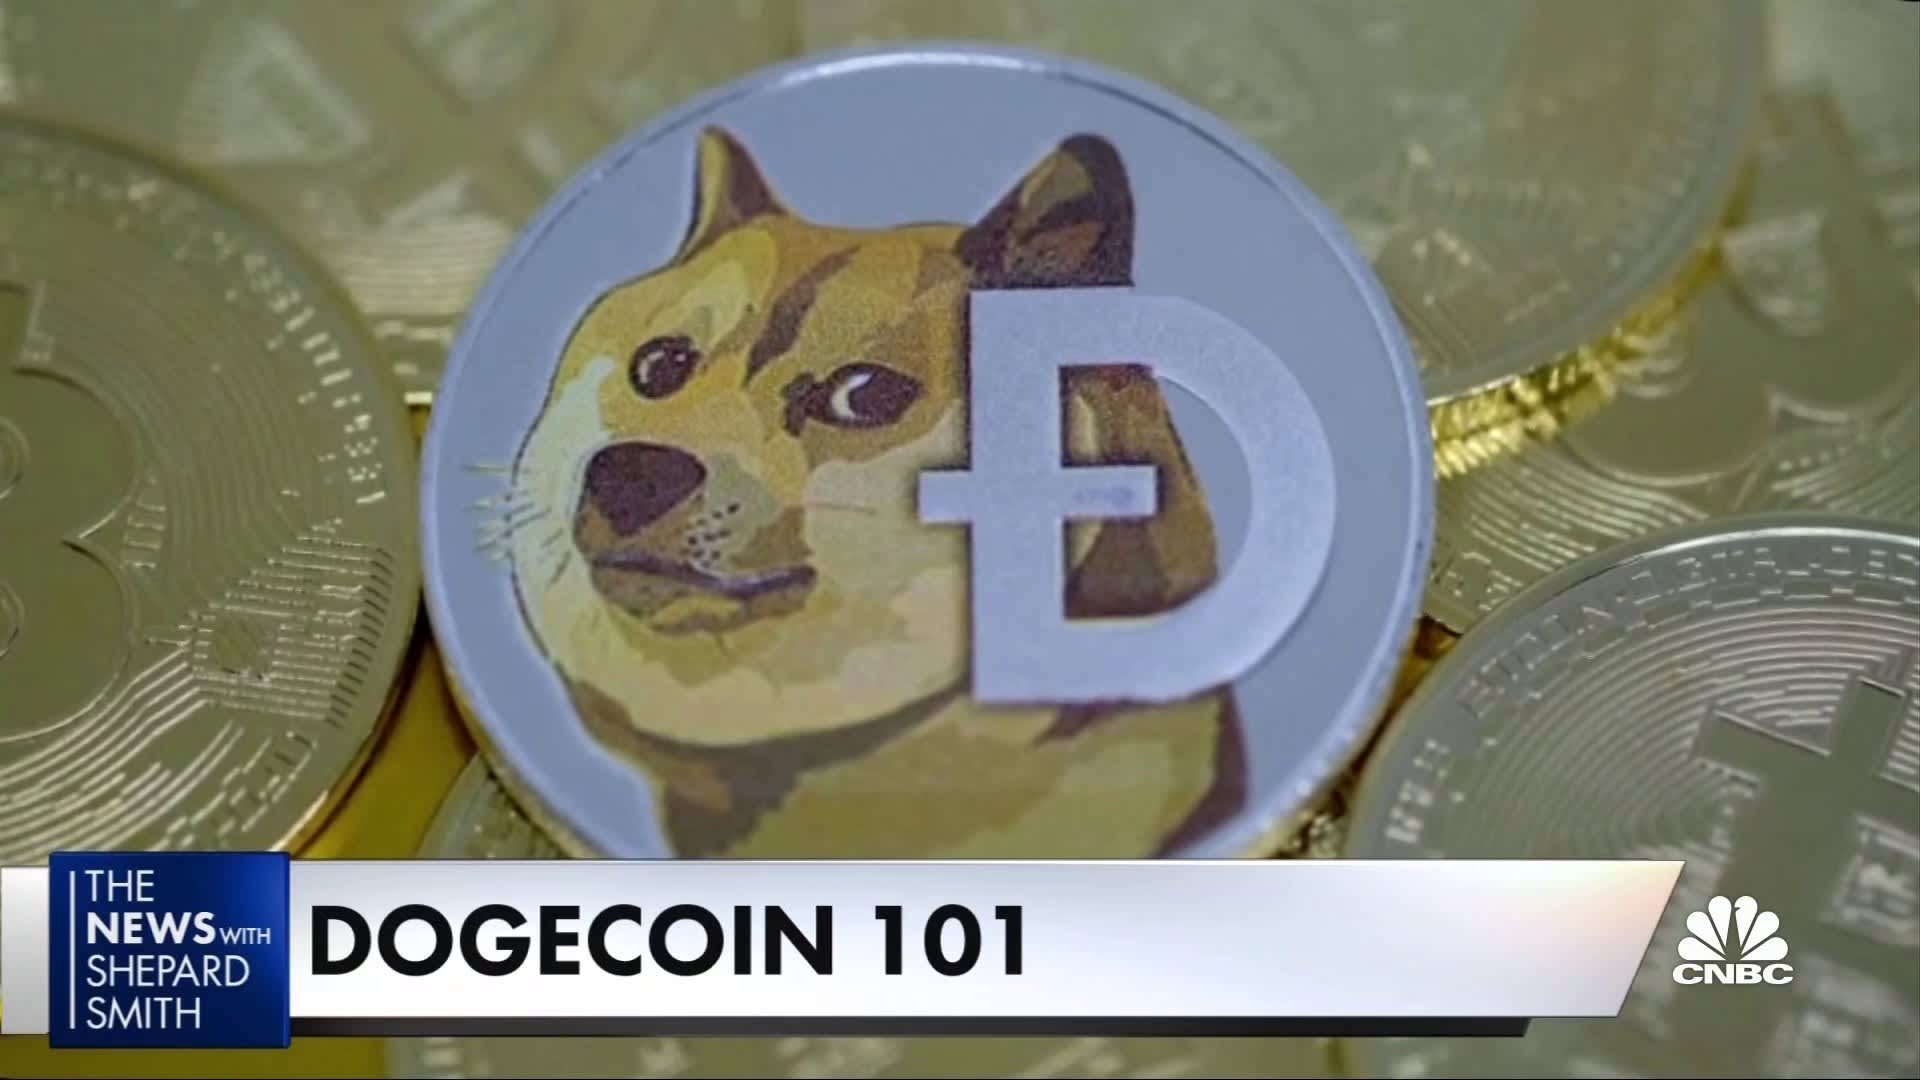 Man who lost money after investing in dogecoin sues Elon Musk for $ billion